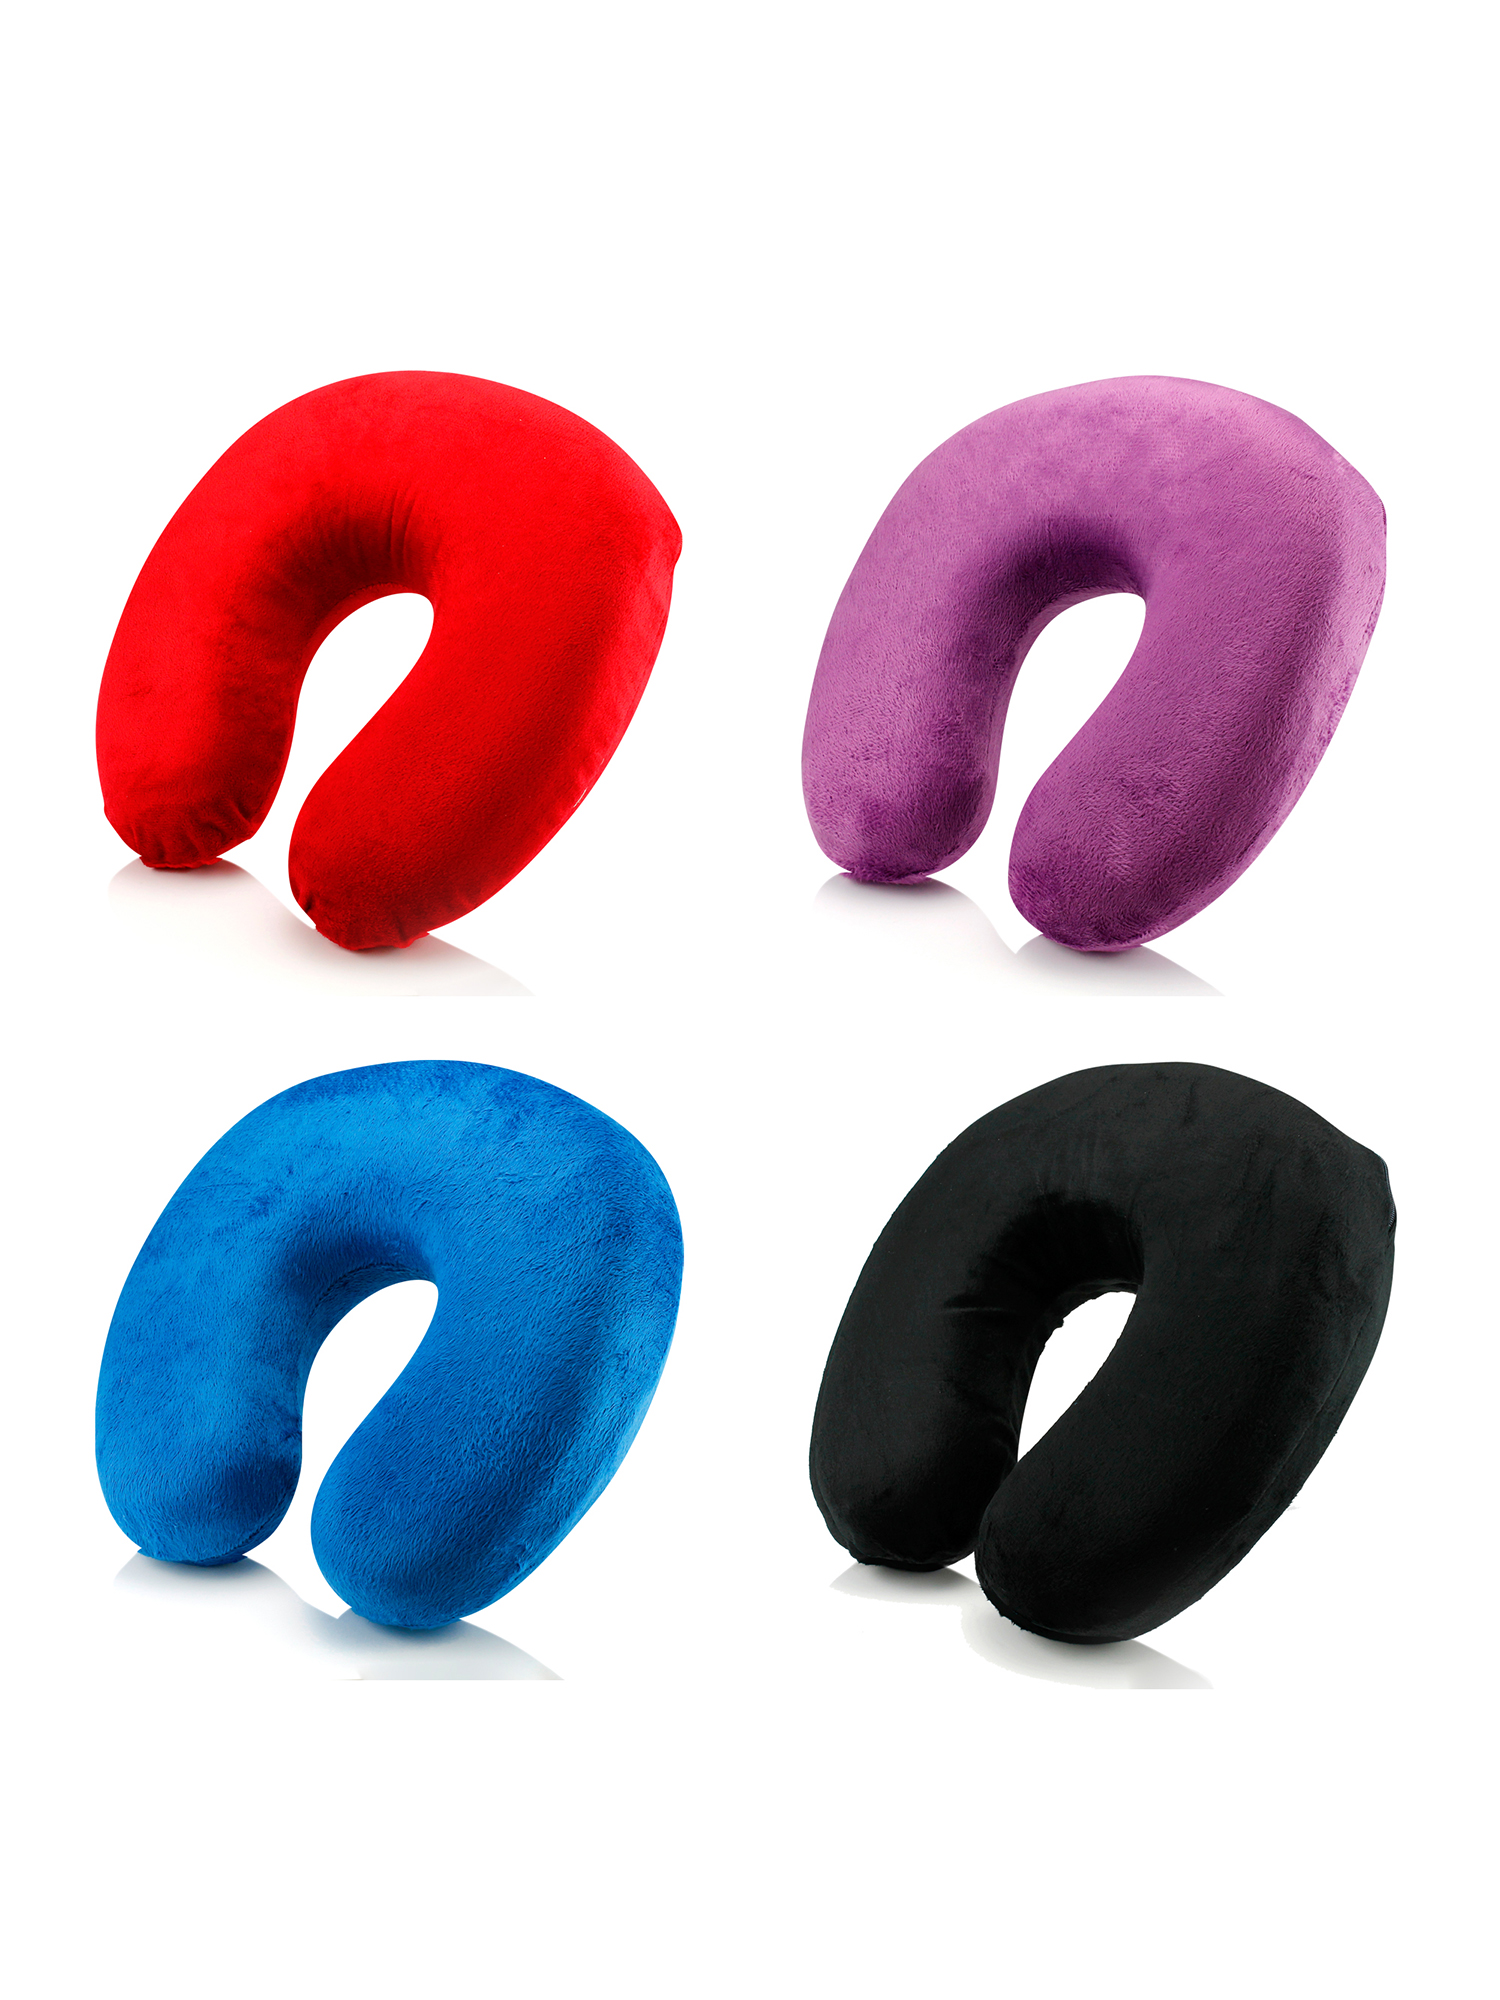 U Shape Memory Foam Neck Cushion Support Comfort Rest Outdoors Car Office Travel Pillow - Purple - image 3 of 4